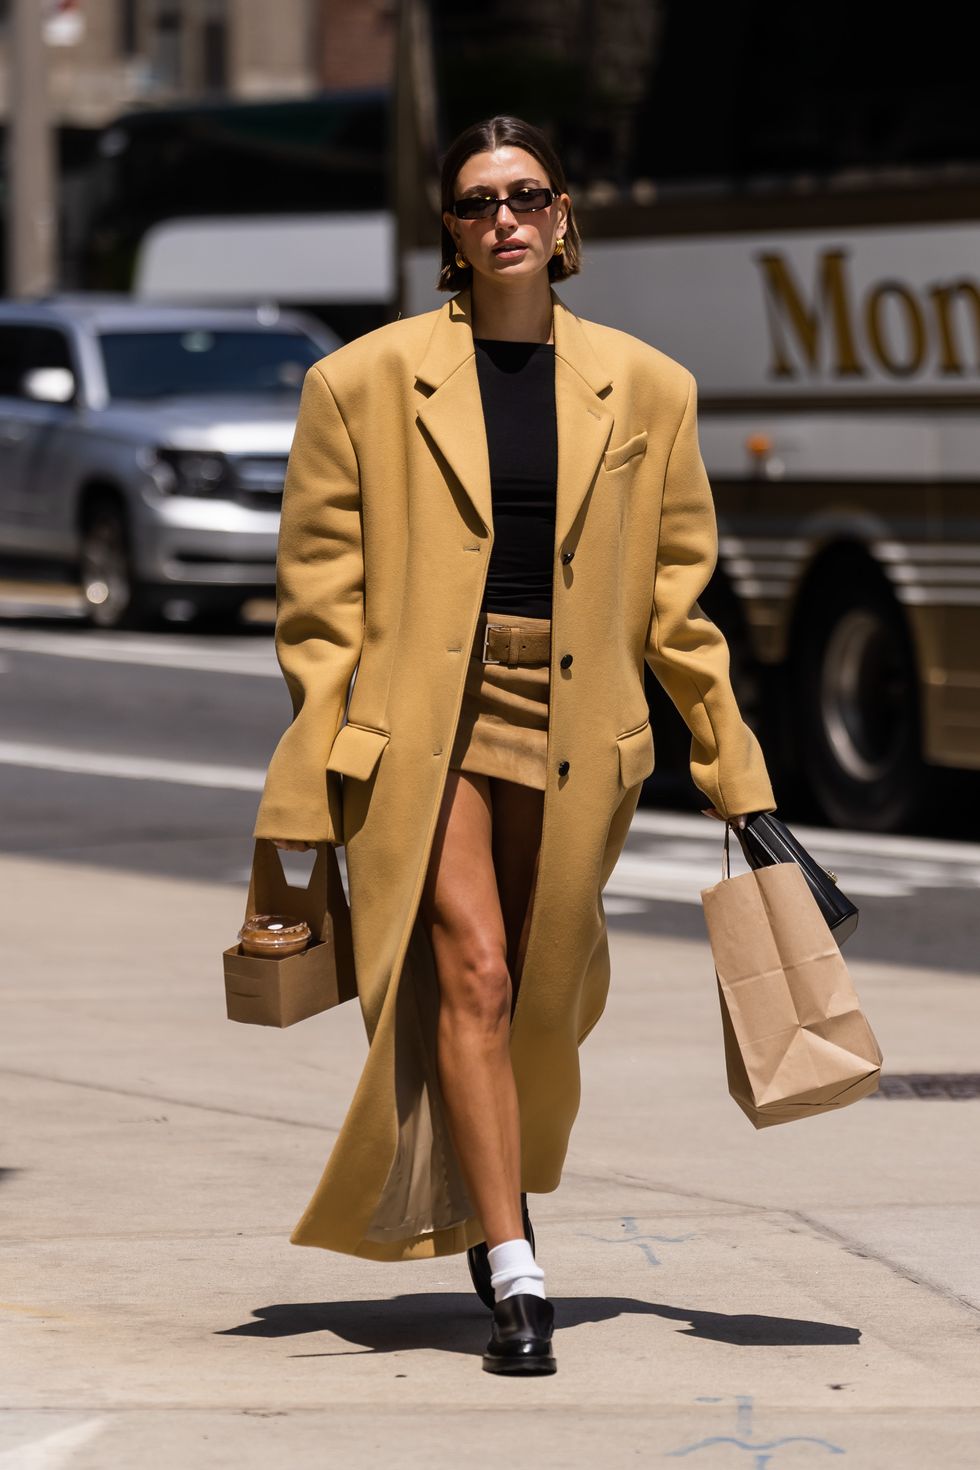 Hailey Bieber Wore Short Miniskirt and Open Long Coat in NYC